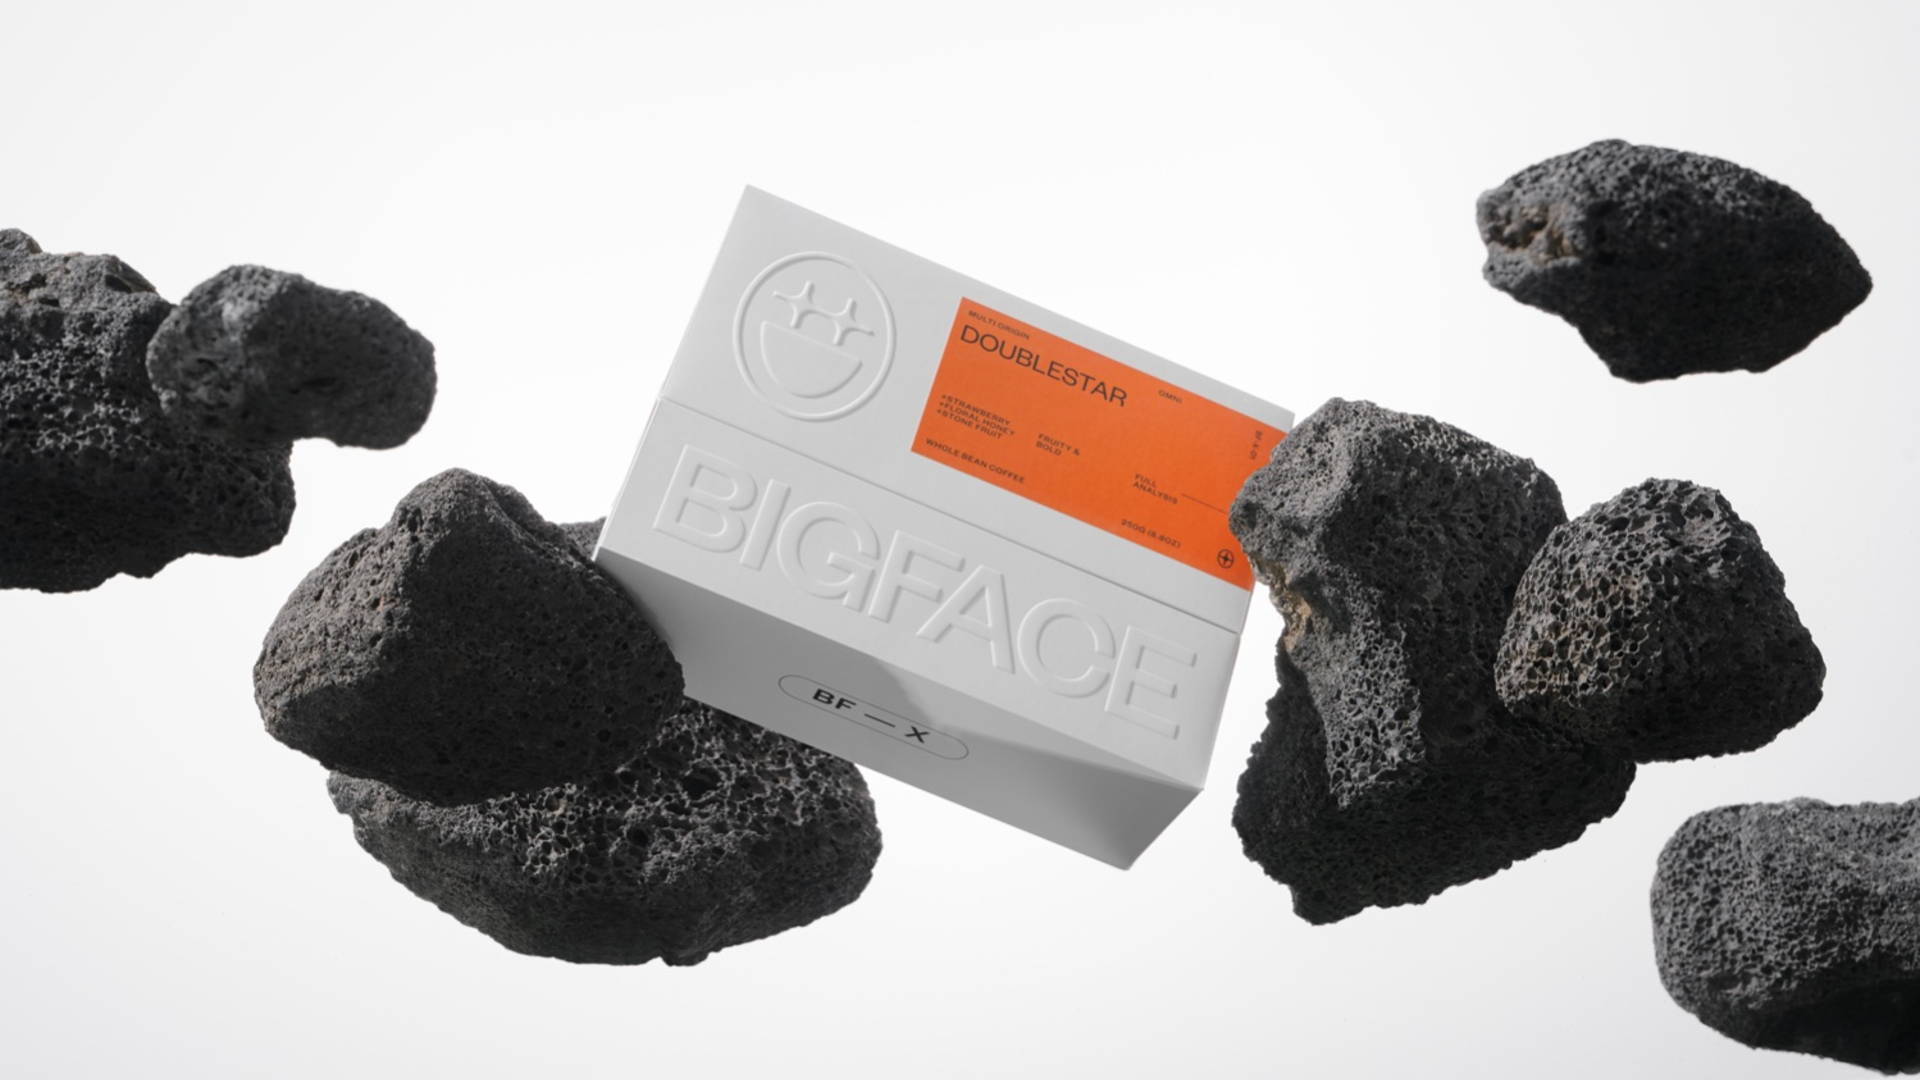 Featured image for BIGFACE's Otherworldly Packaging